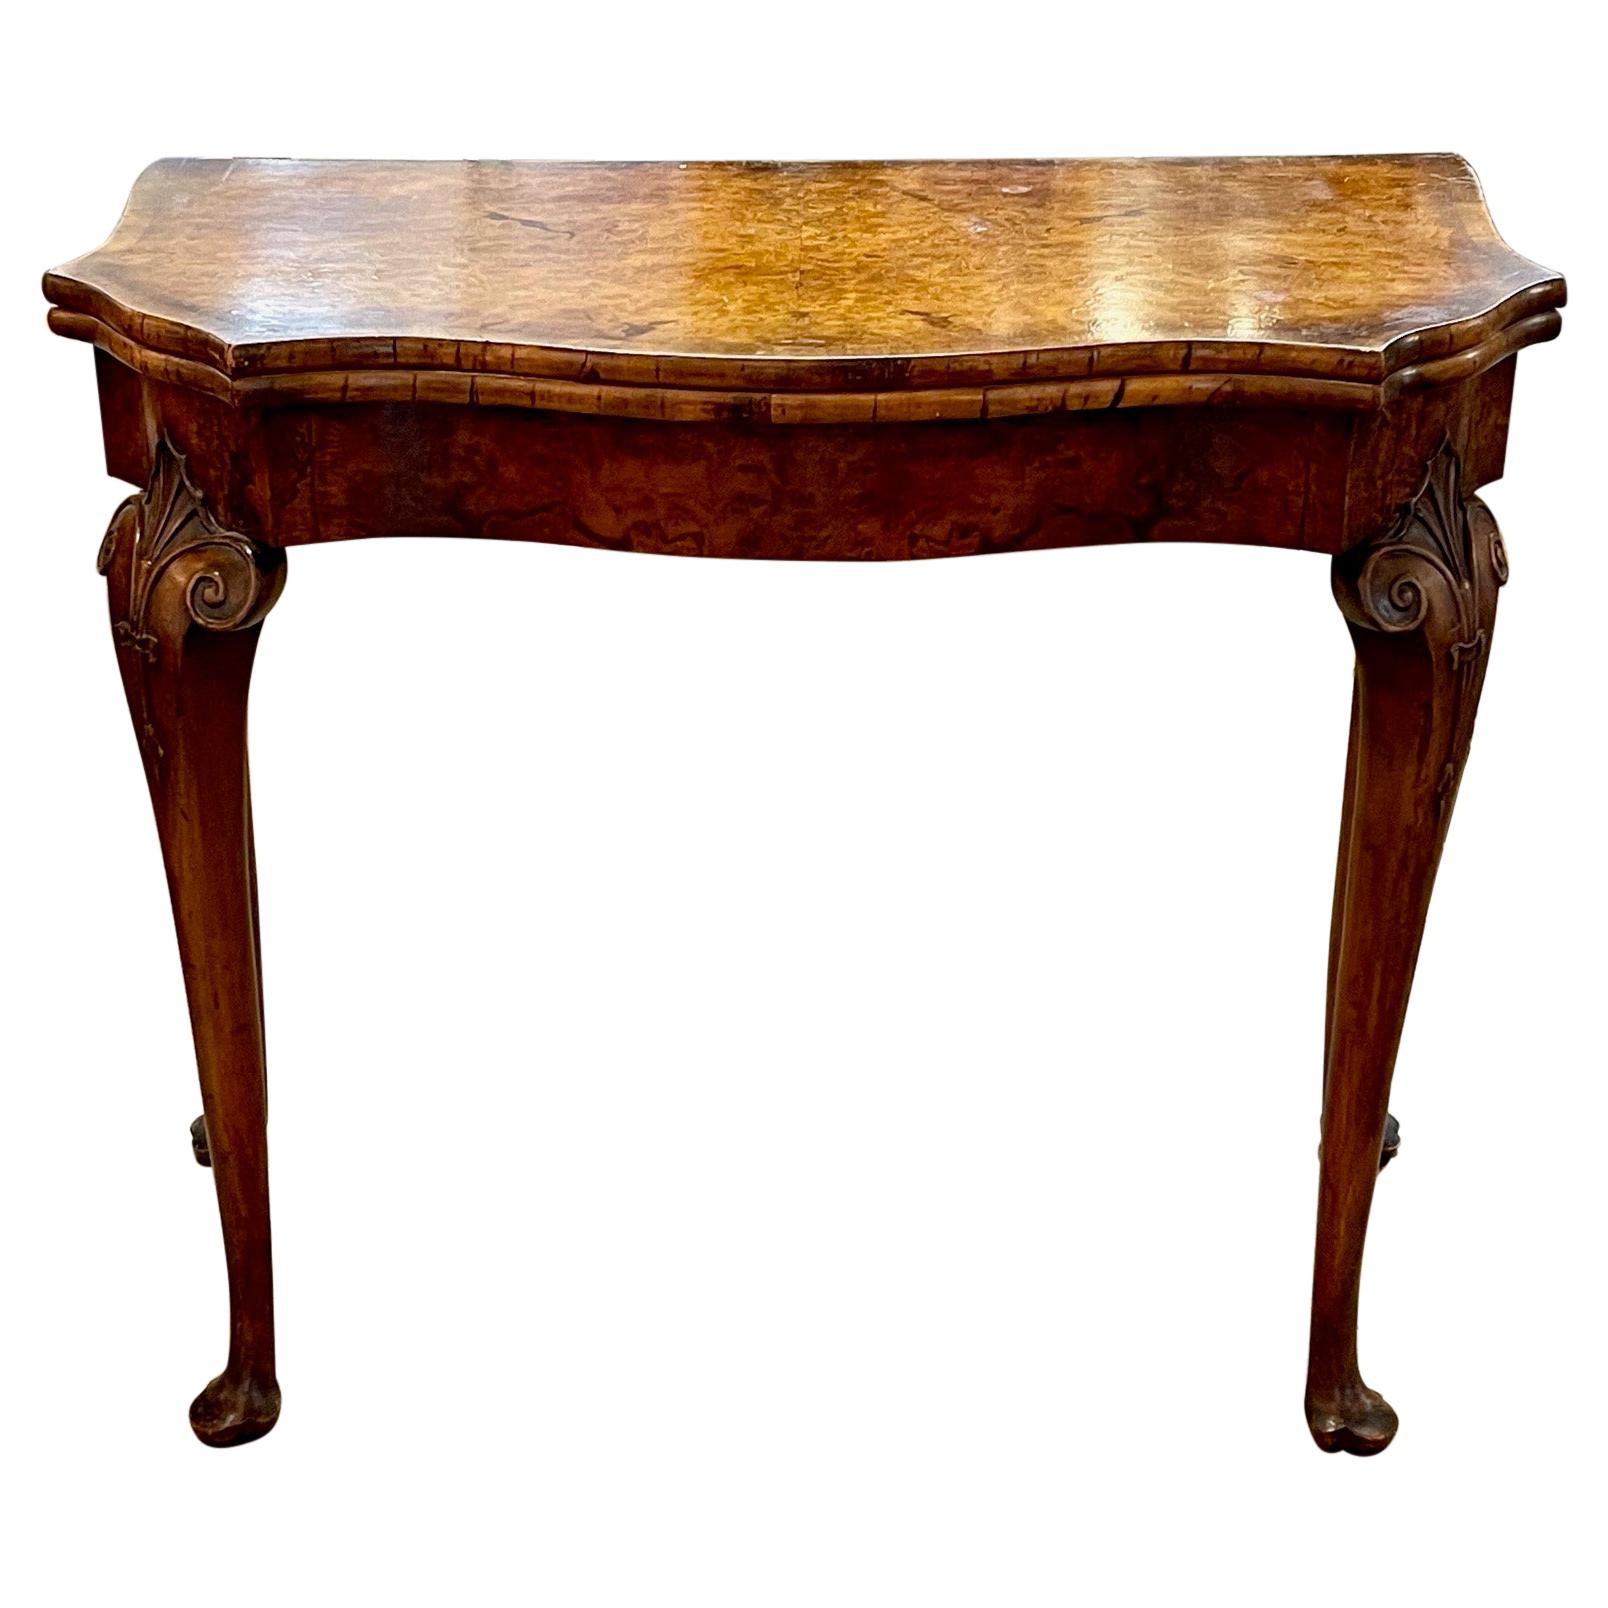 19th Century English Queen Anne Burl Walnut Lift Top Game Table